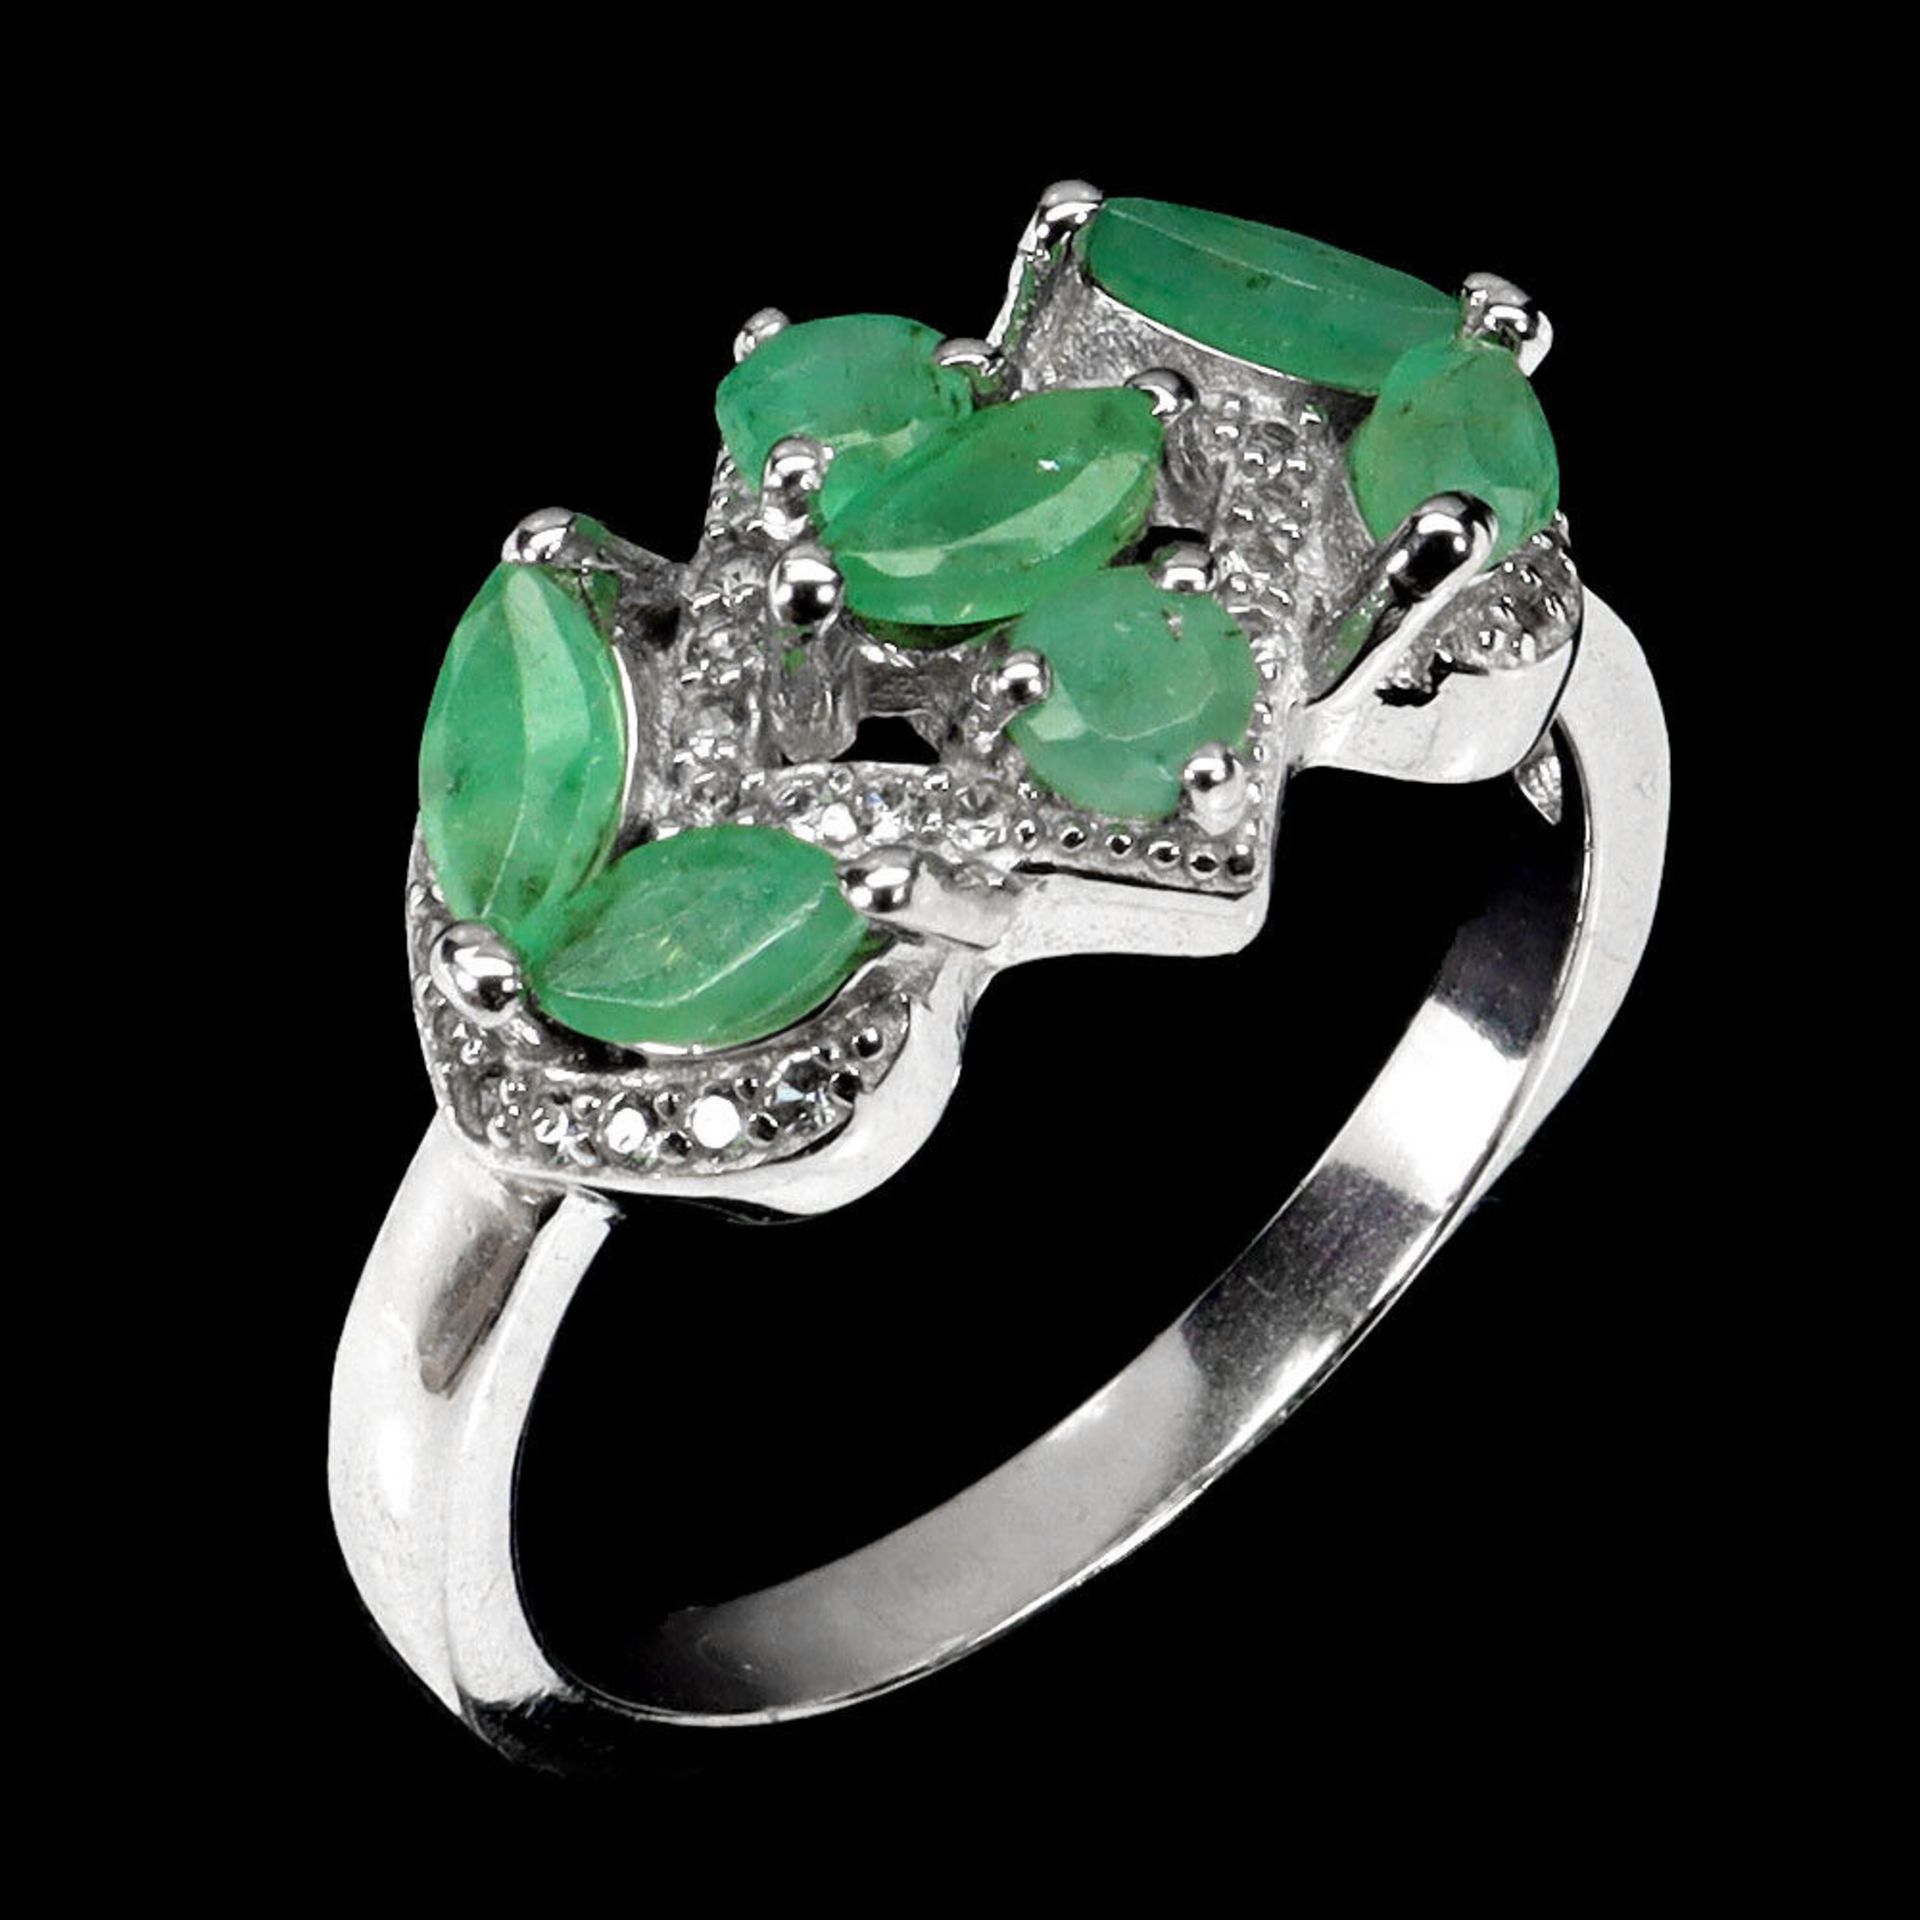 A matching 925 silver ring set with marquise cut emeralds and white stones, ring size N. - Image 2 of 3